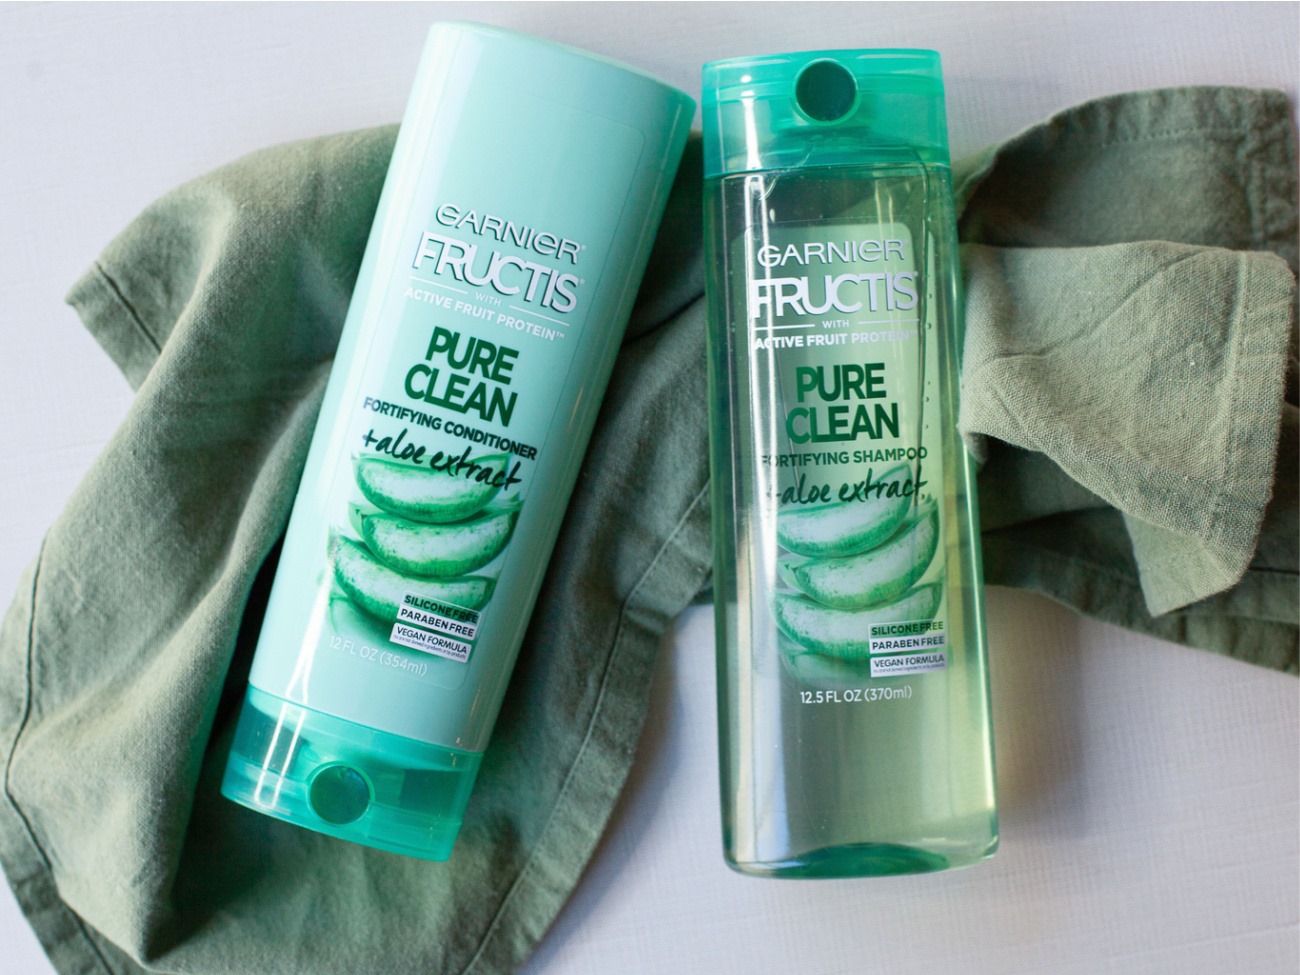 Garnier Fructis Shampoo And Conditioner Only 79¢ At Kroger